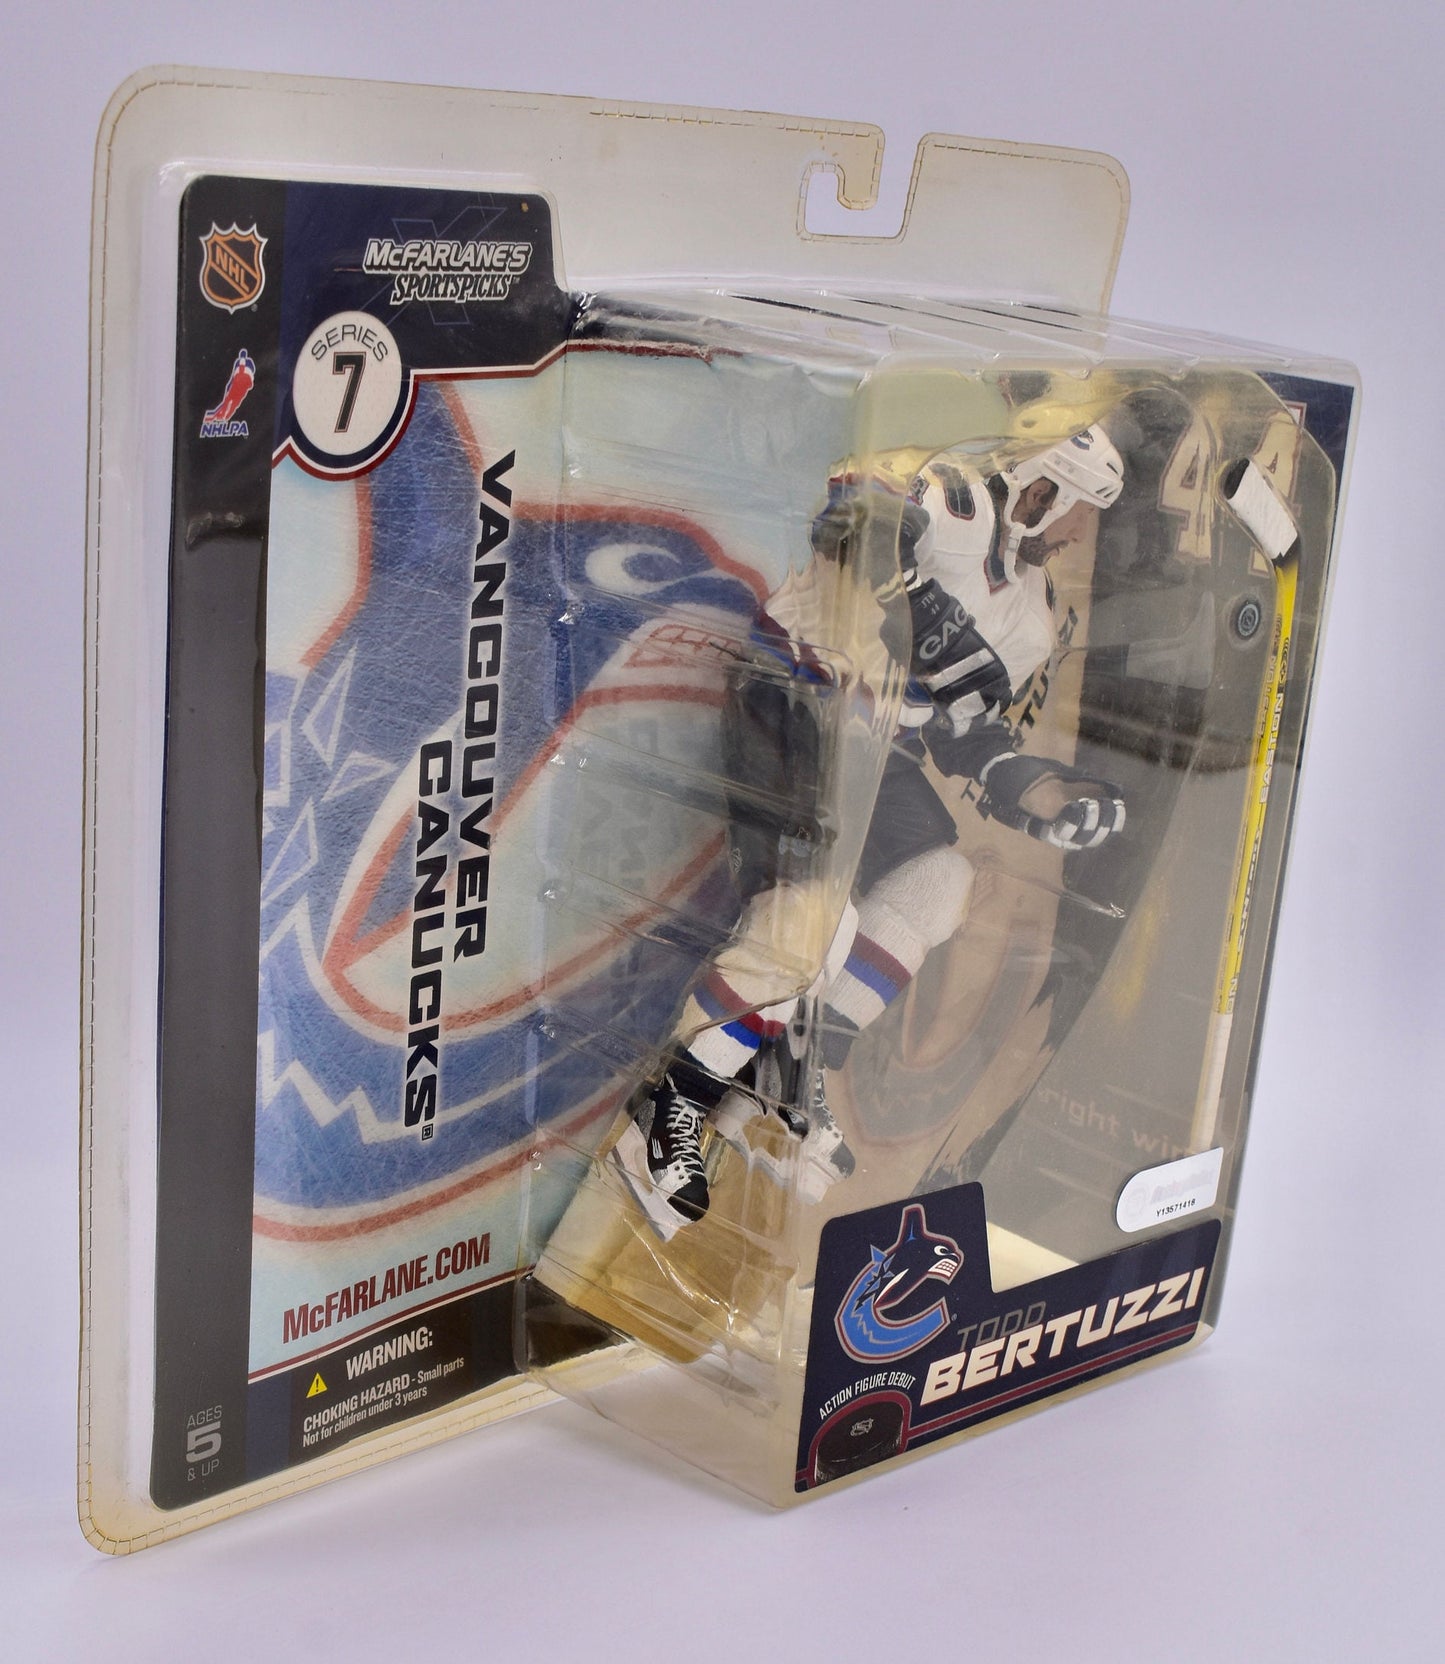 McFarlane Toys Todd Bertuzzi Vancouver Canucks White Jersey Series 7 Collectable NHL Hockey Action Figure Perfect Birthday Gift